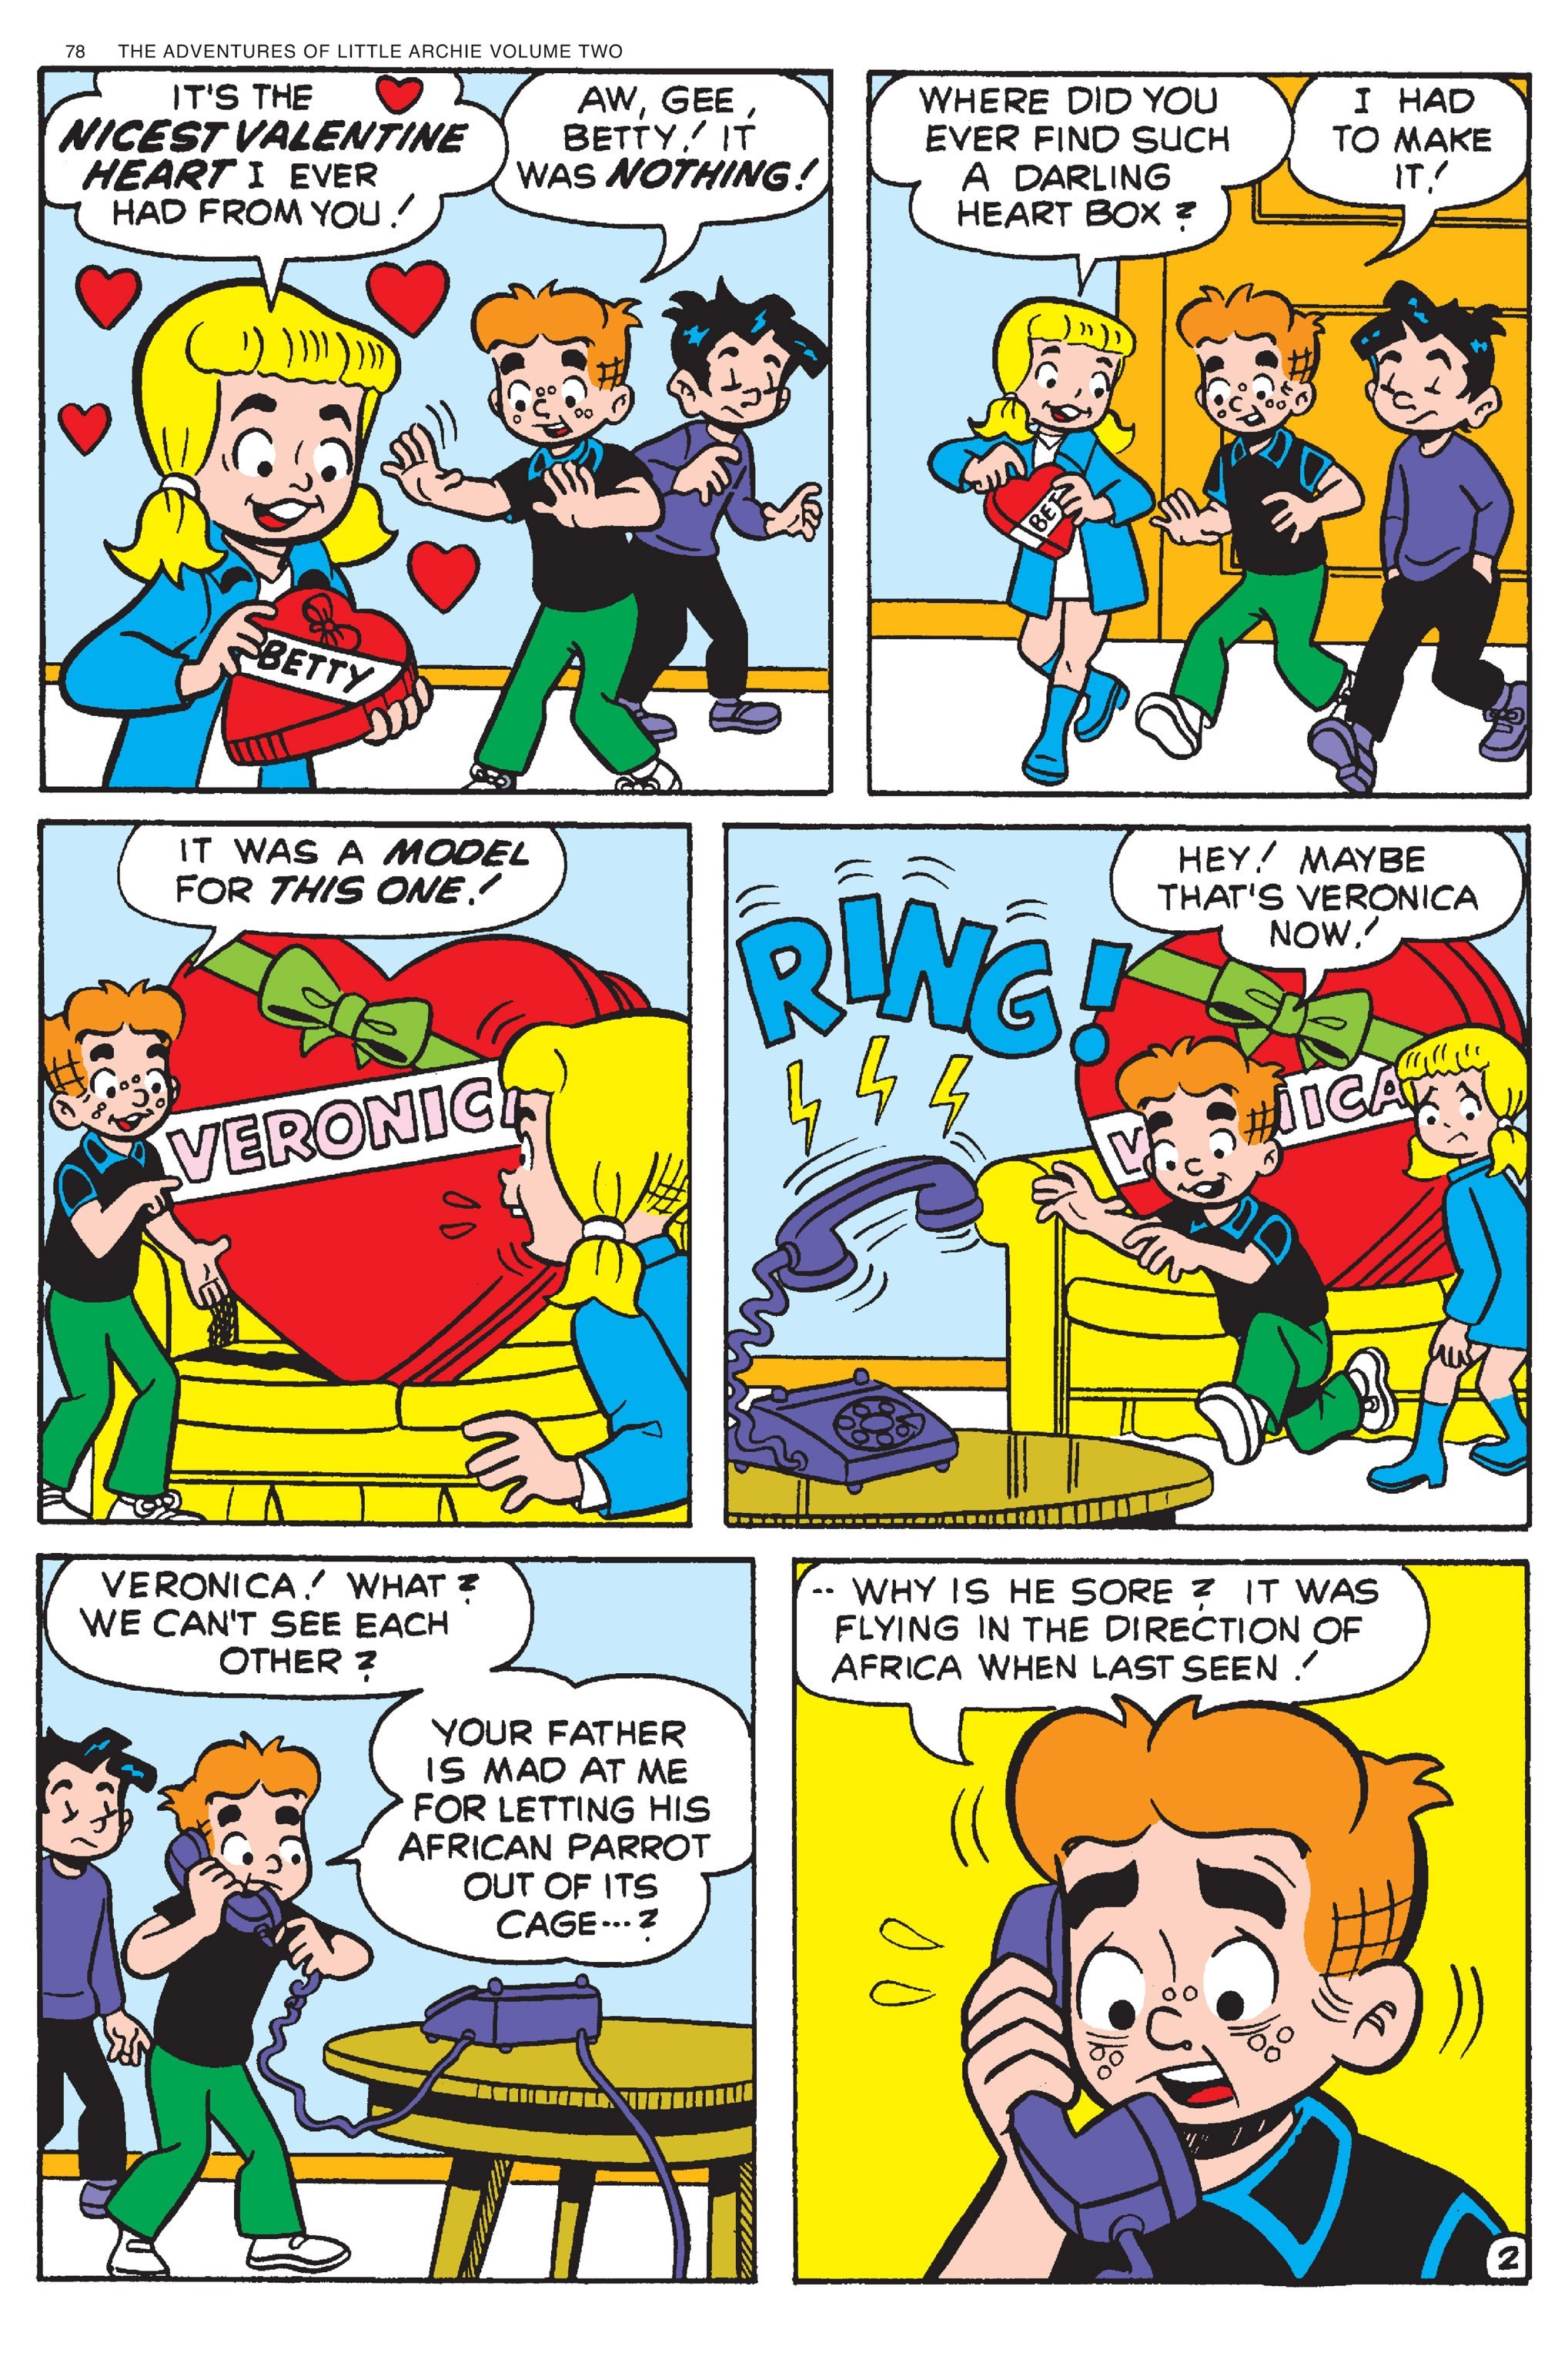 Read online Adventures of Little Archie comic -  Issue # TPB 2 - 79